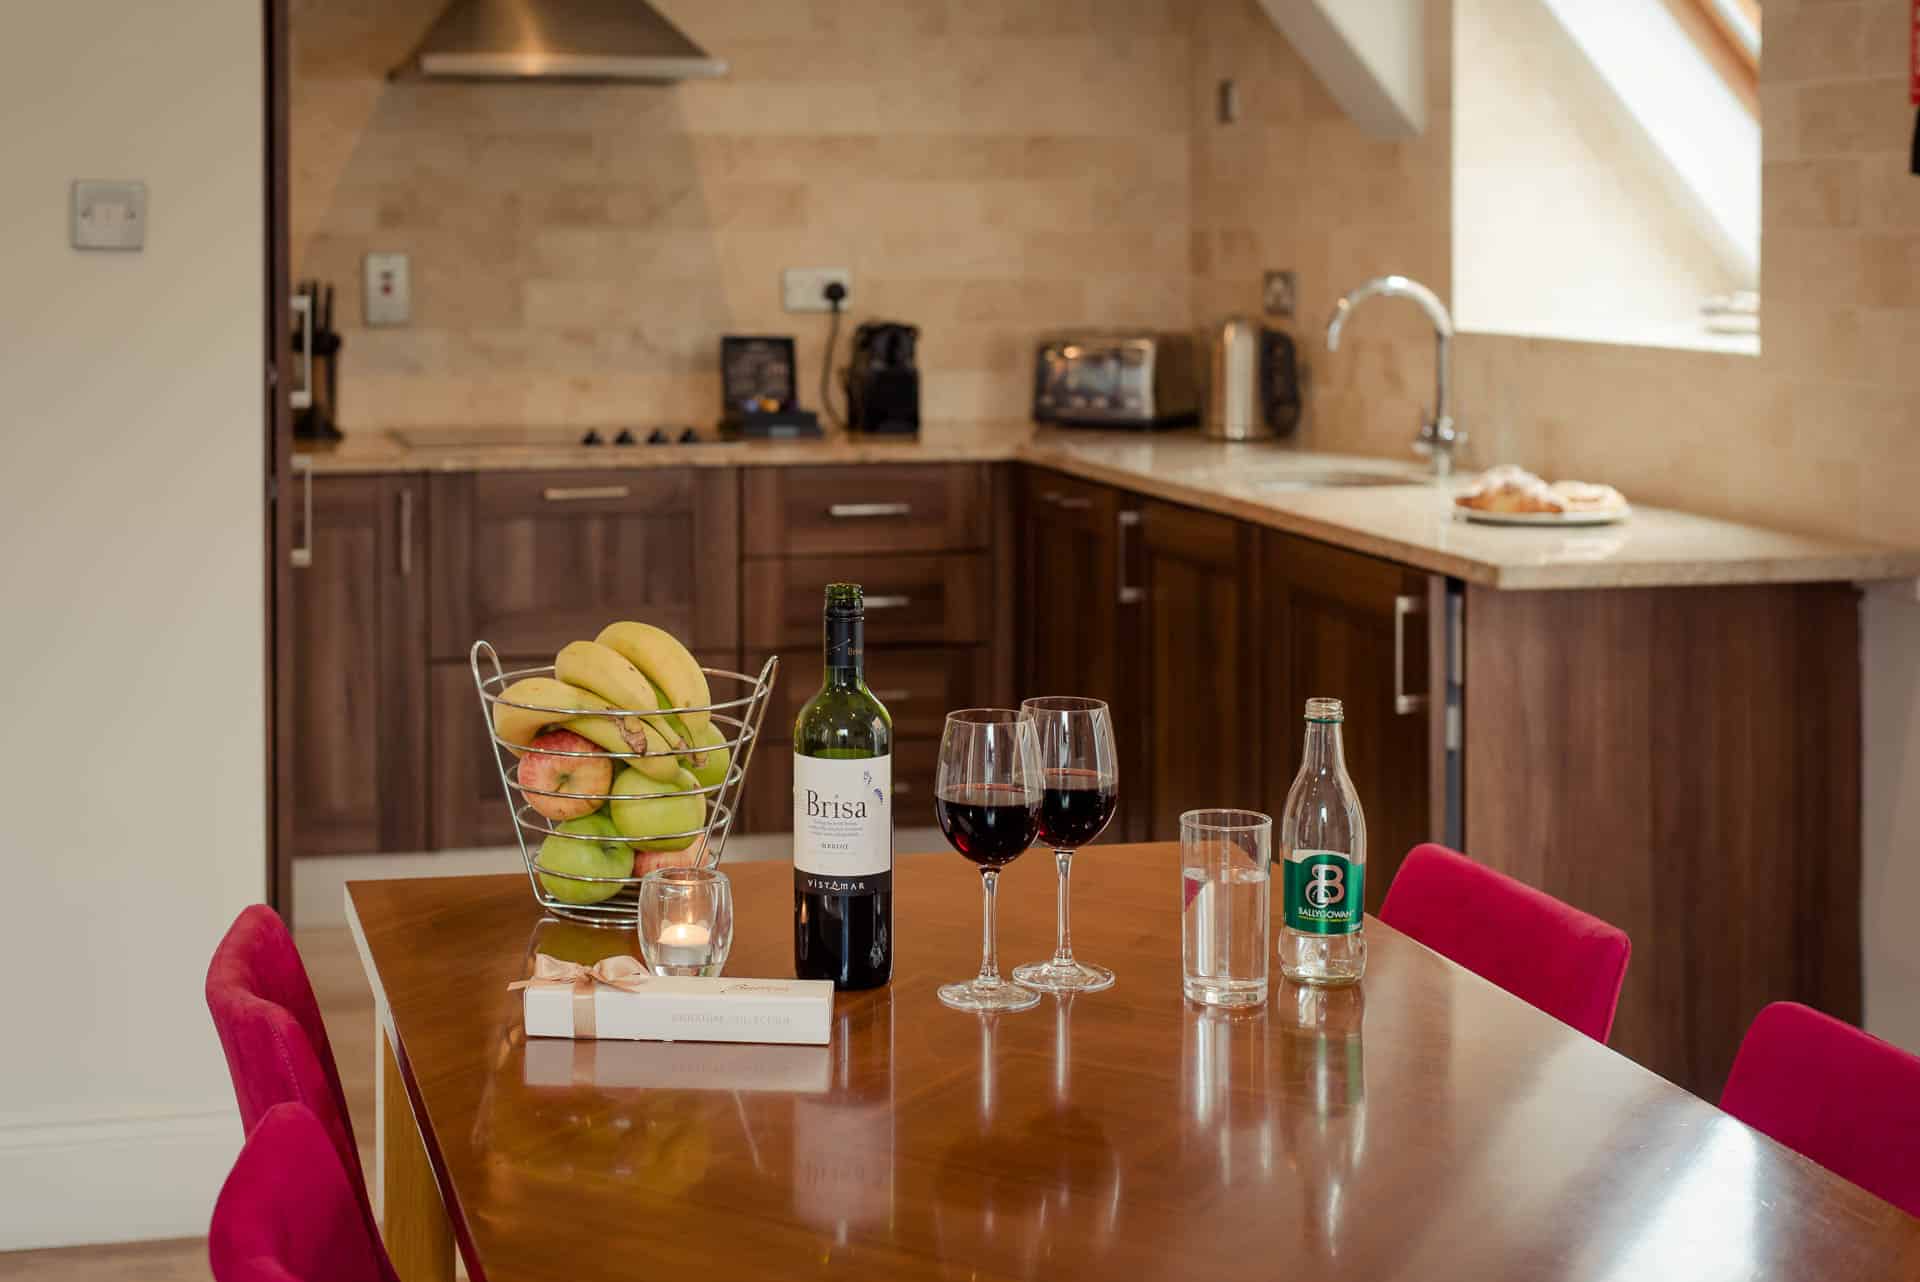 PREMIER SUITES PLUS Dublin Leeson Street kitchen table with fruit and wine